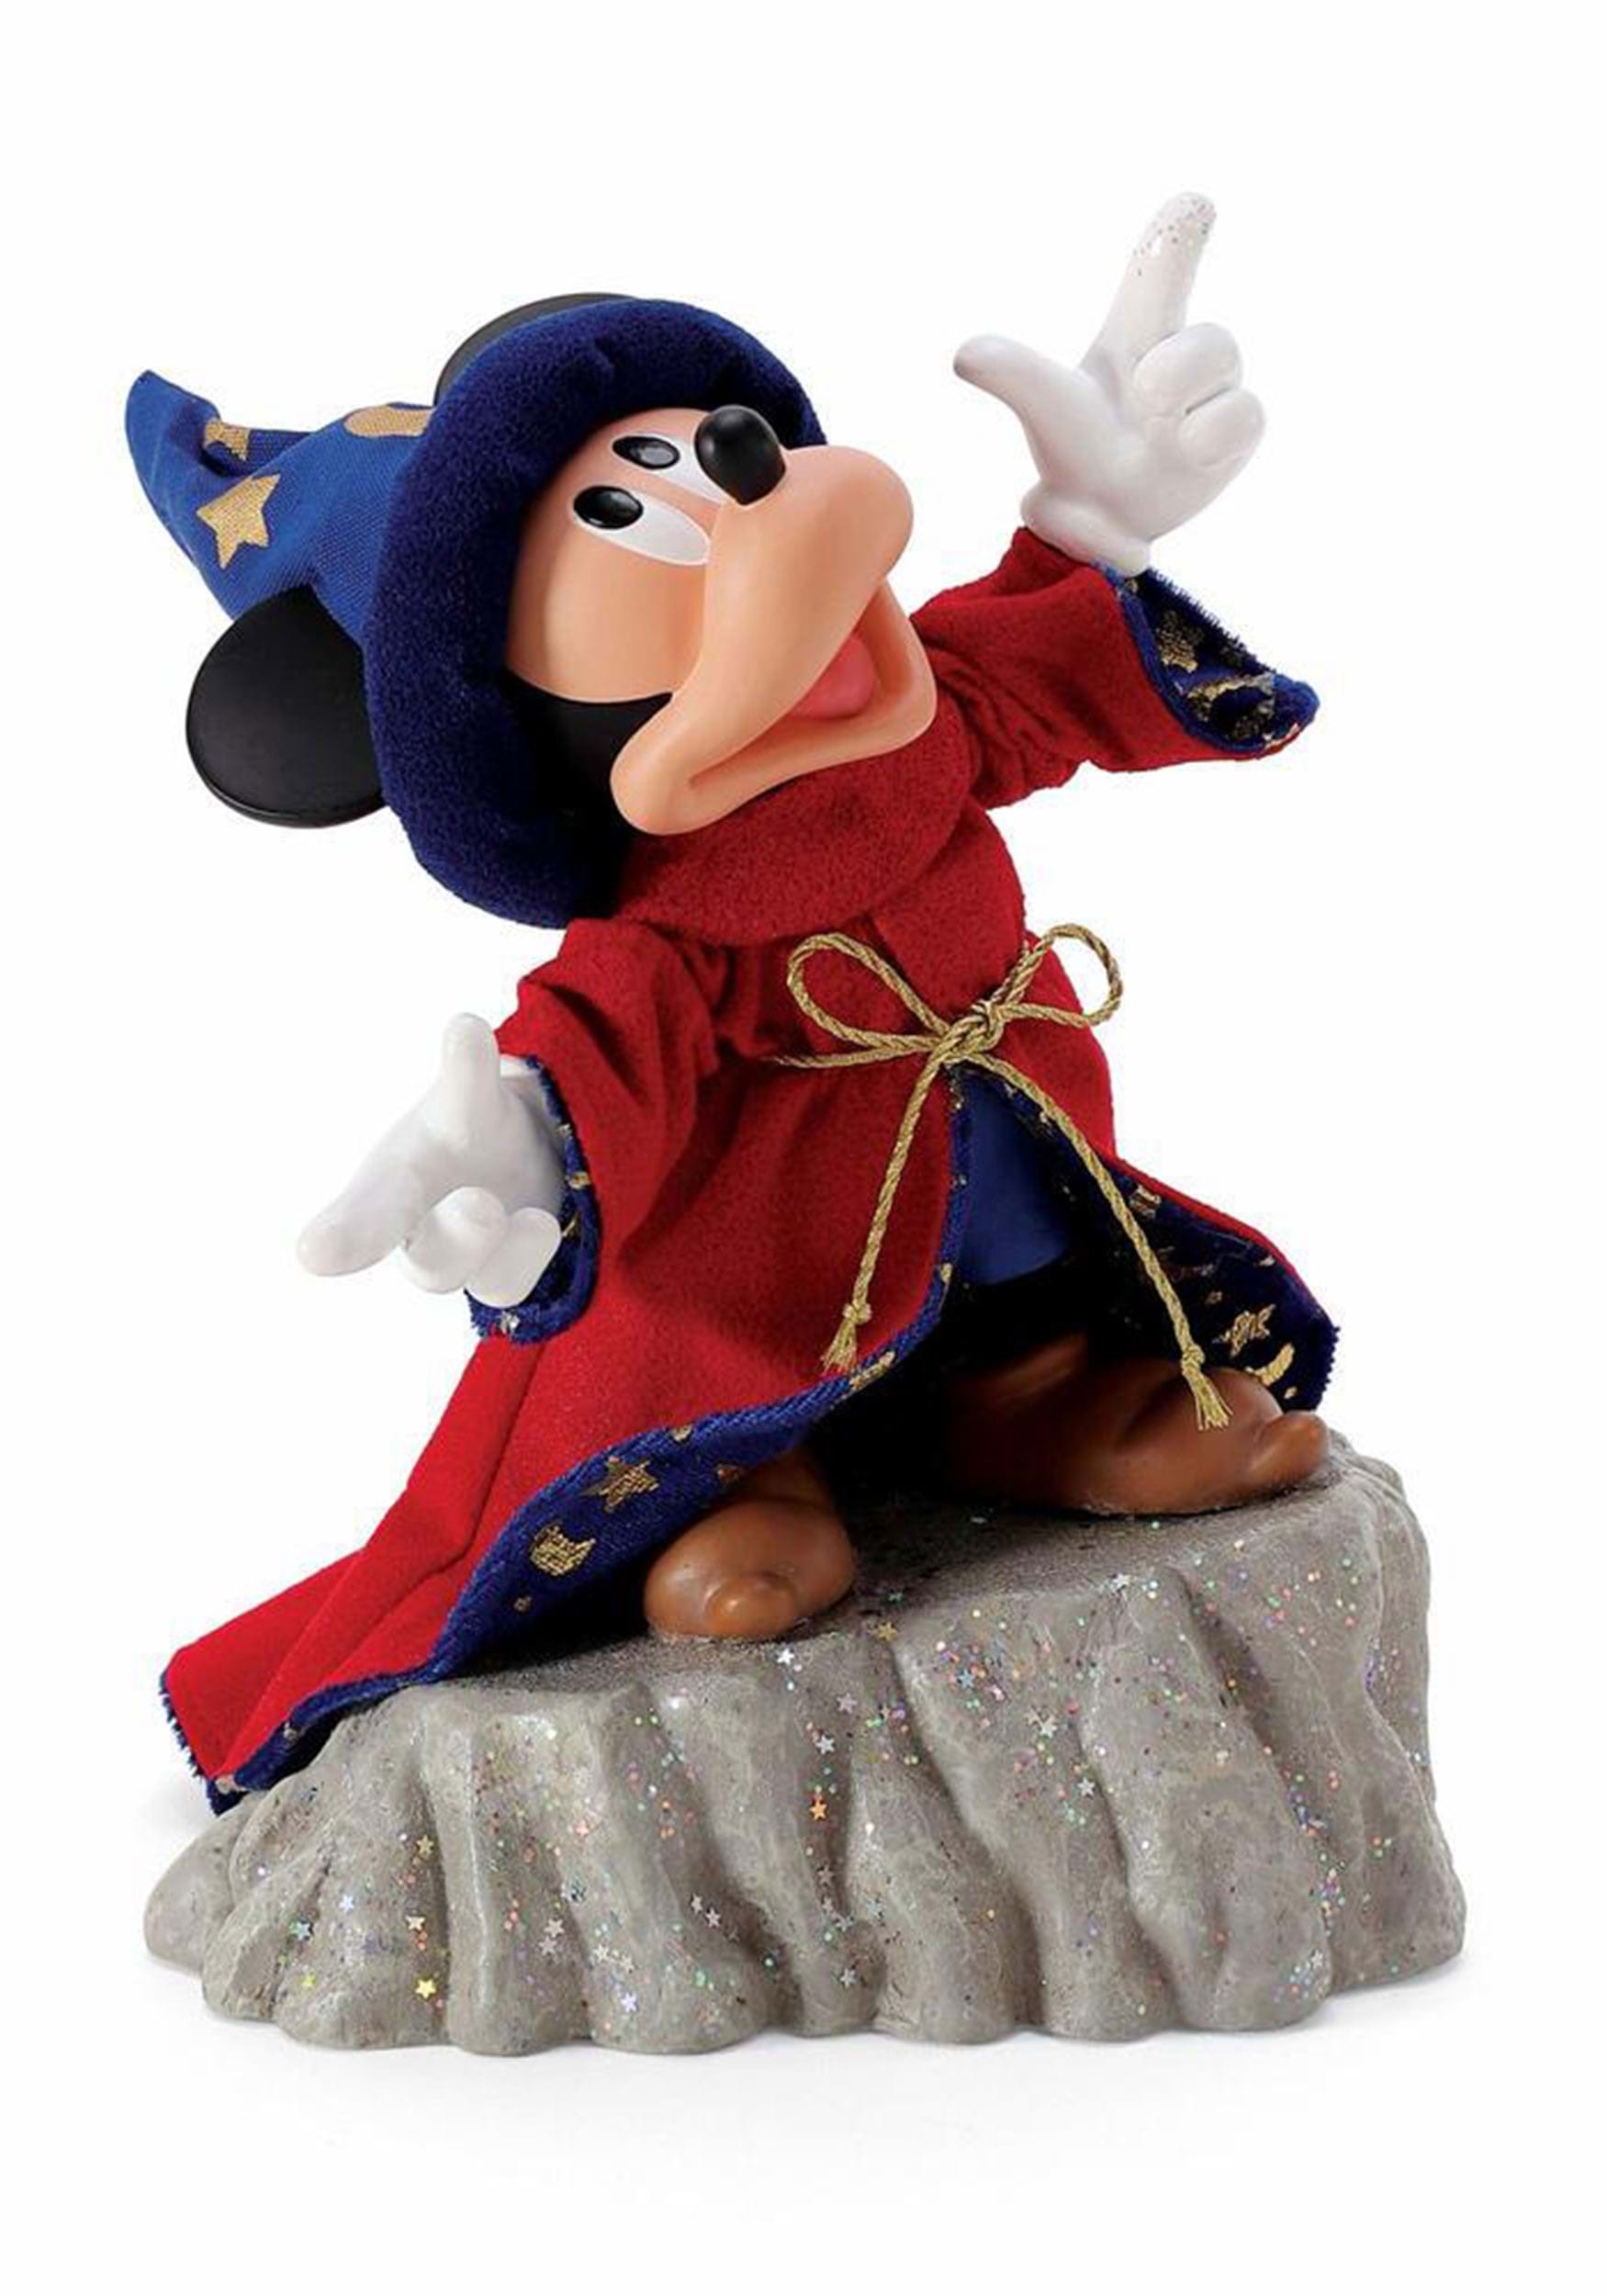 Department 56 Sorcerer Mickey Statue from Fantasia